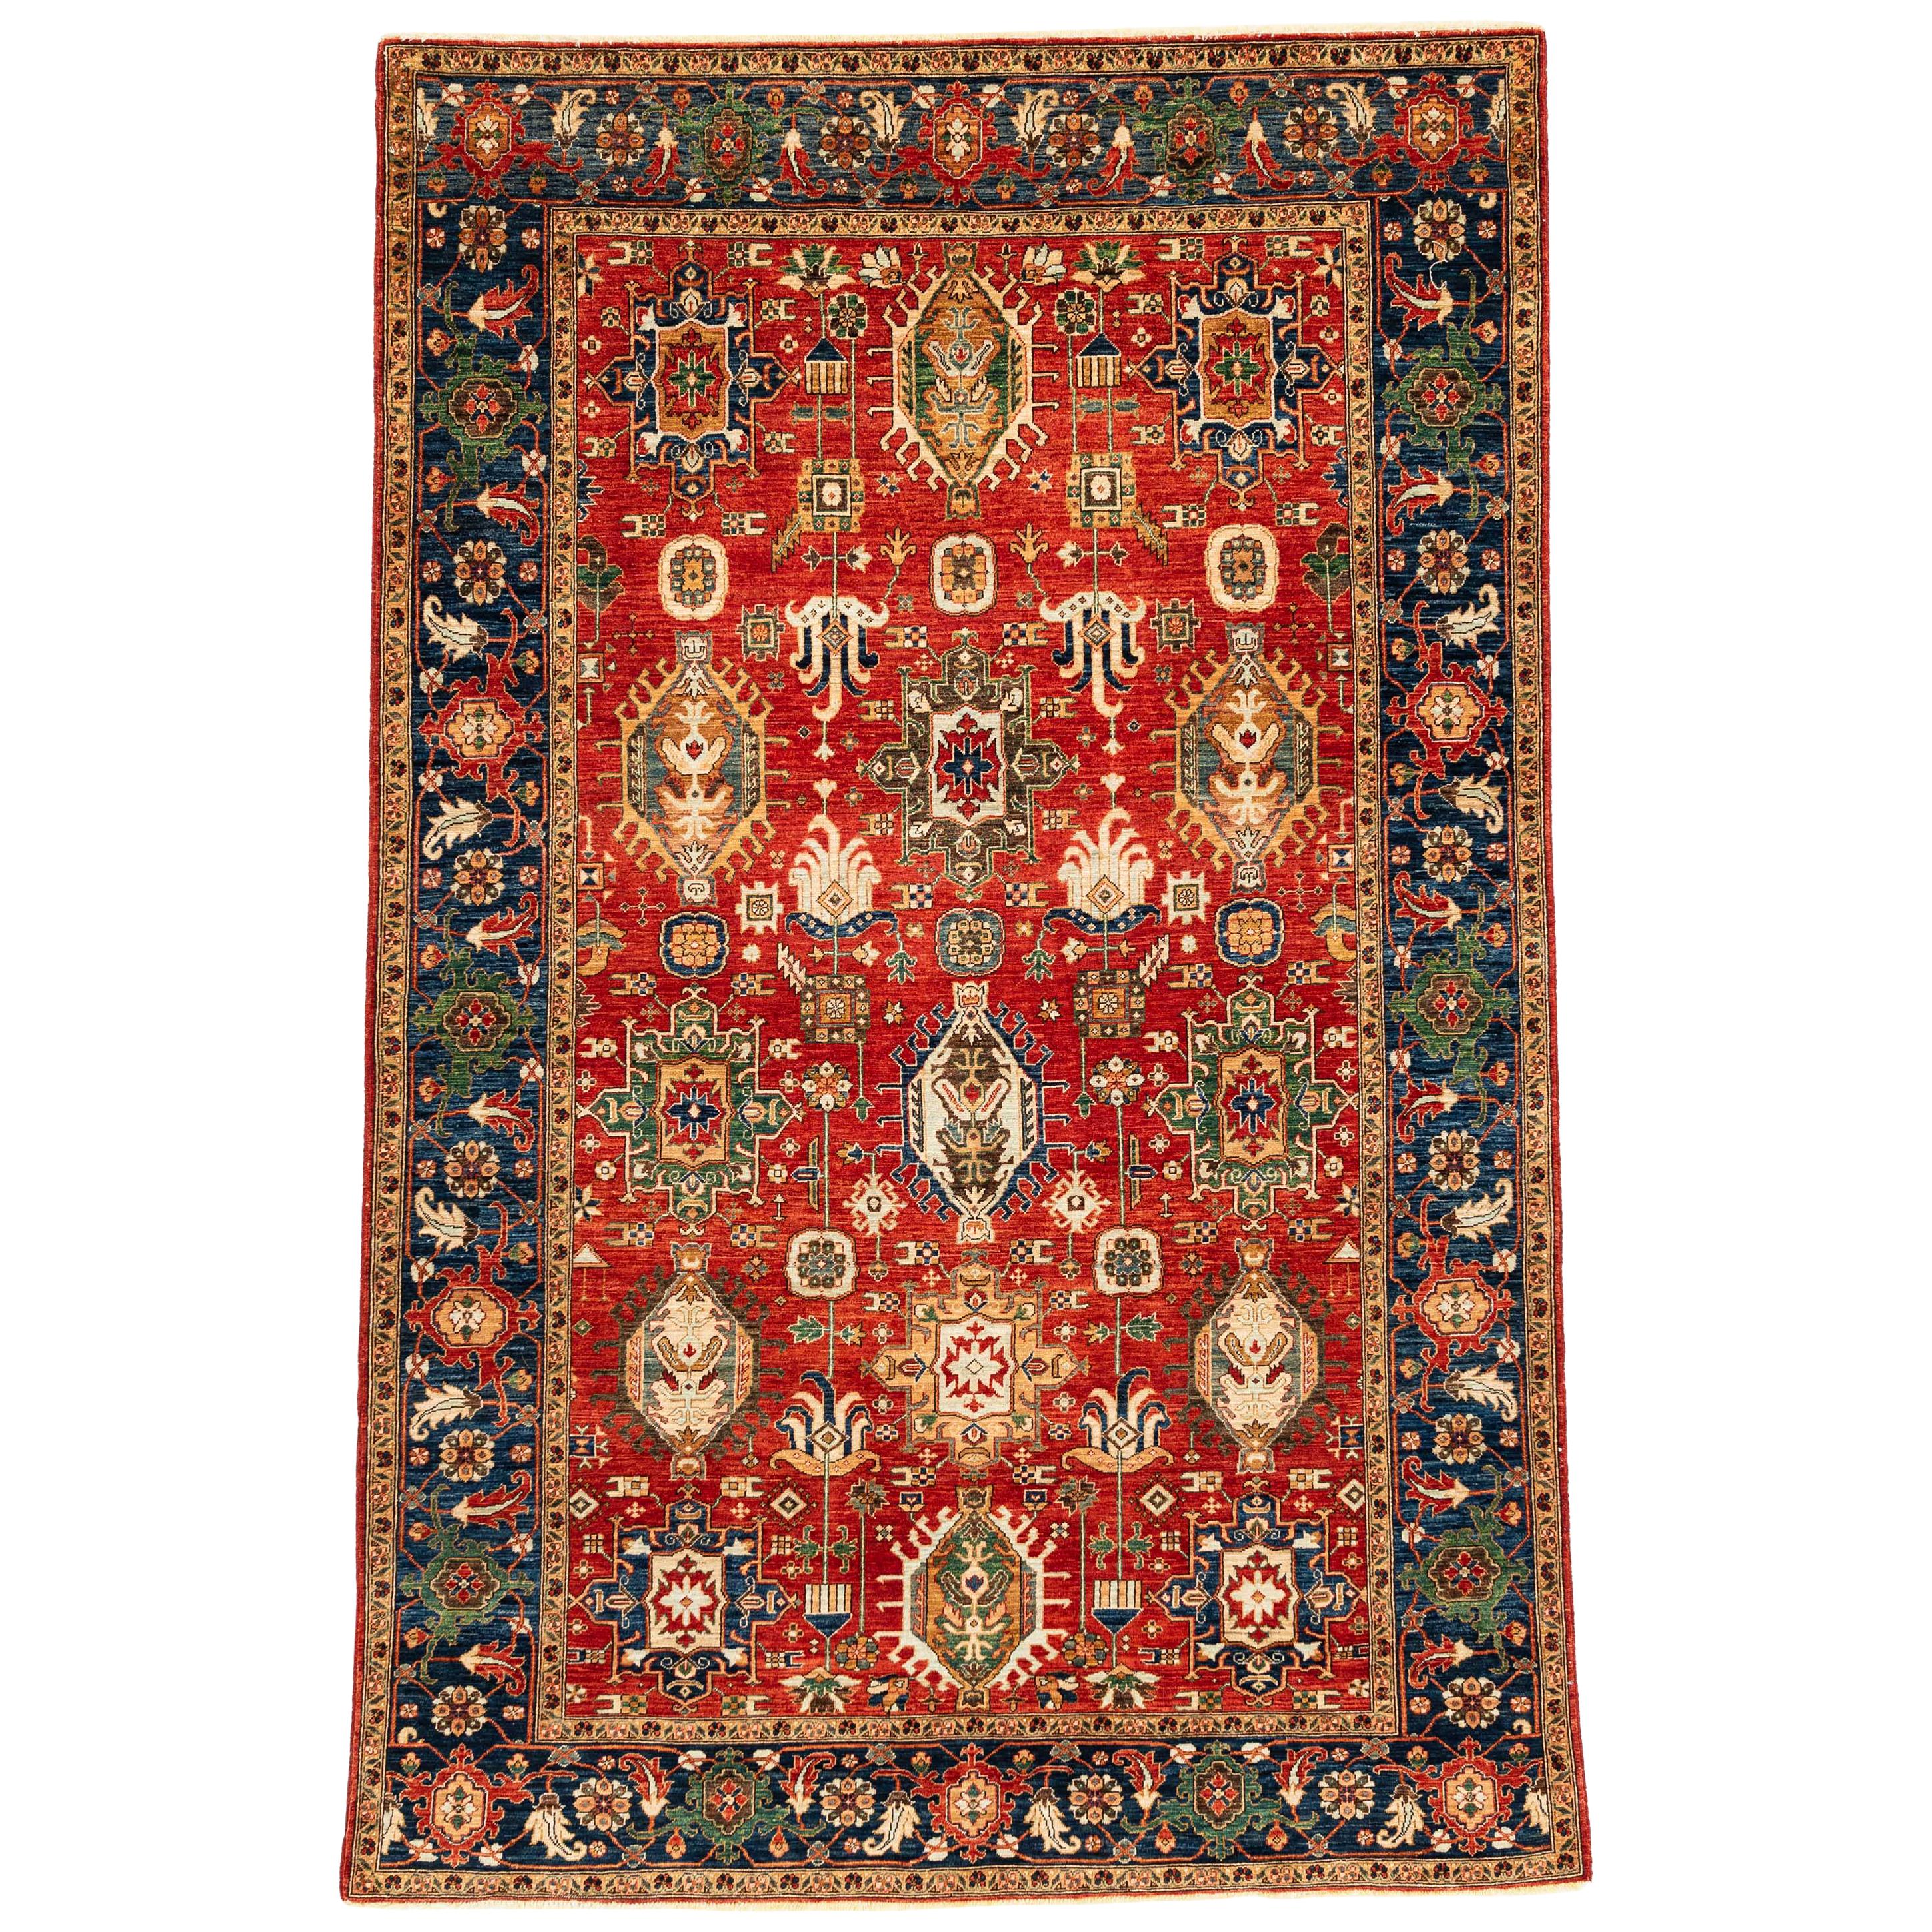 New Afghan Karadja Transitional Rug in Rust, Blue, Yellow, and Cream